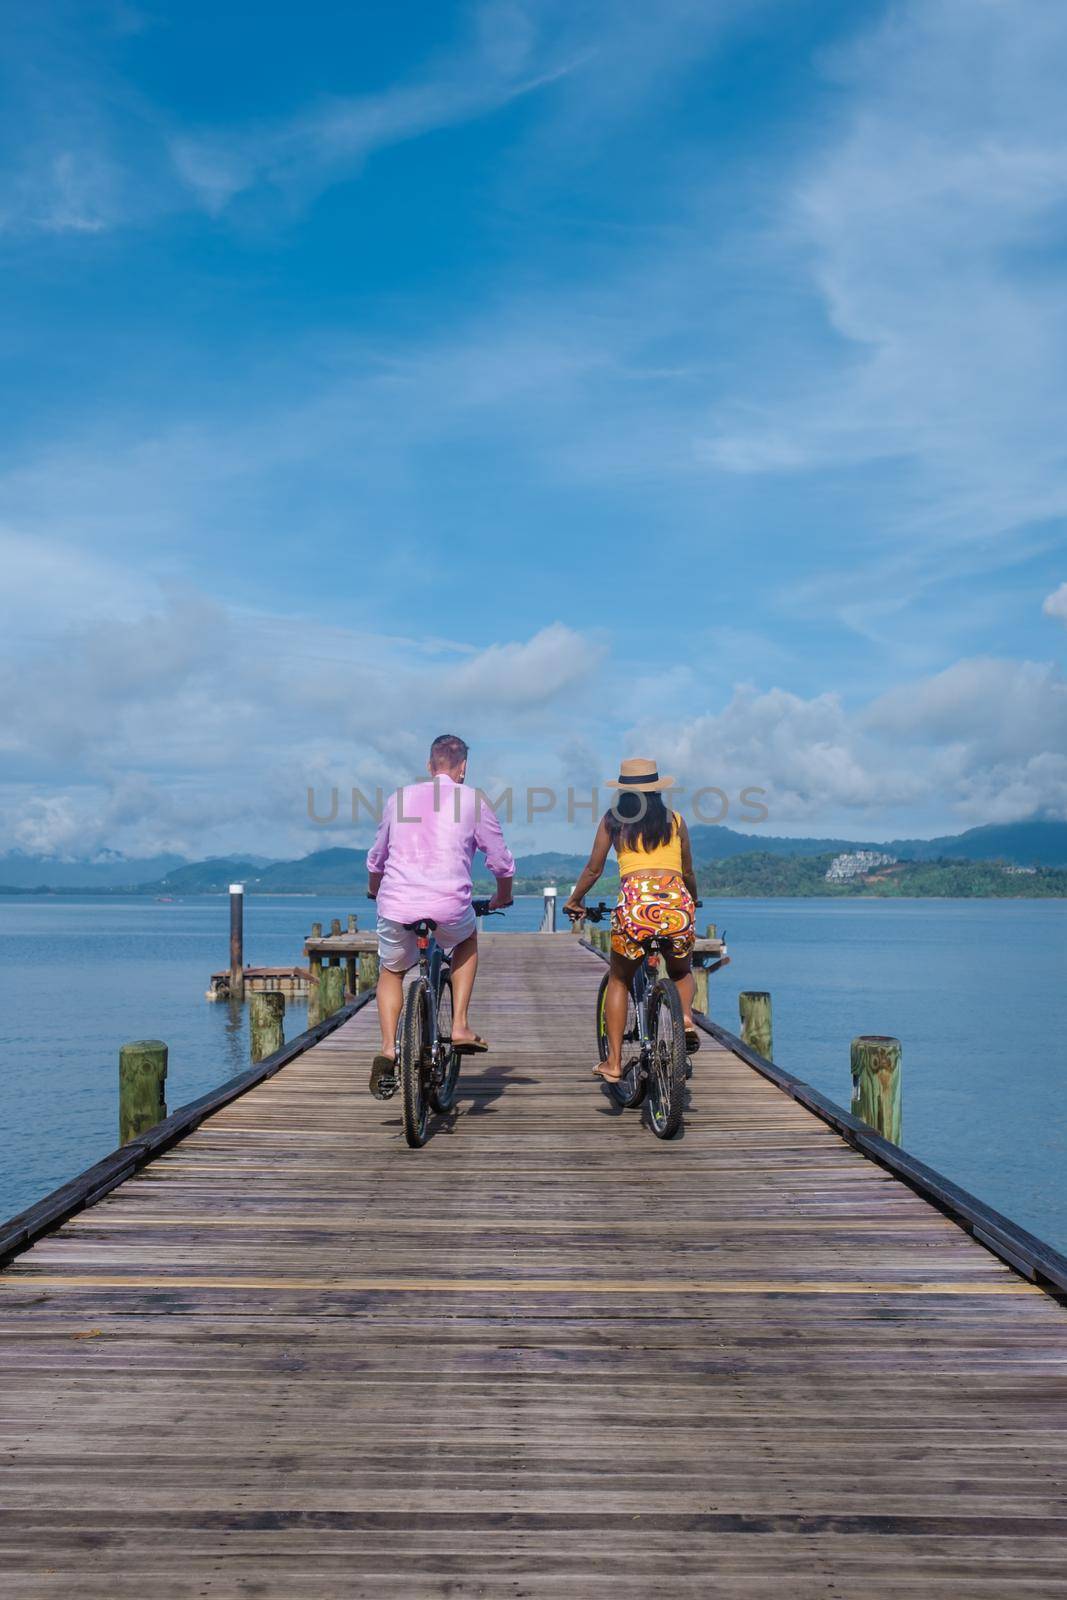 men and woman on a bicycle, a couple of men and woman on a tropical island with a wooden pier jetty in Thailand Phuket Naka Island.